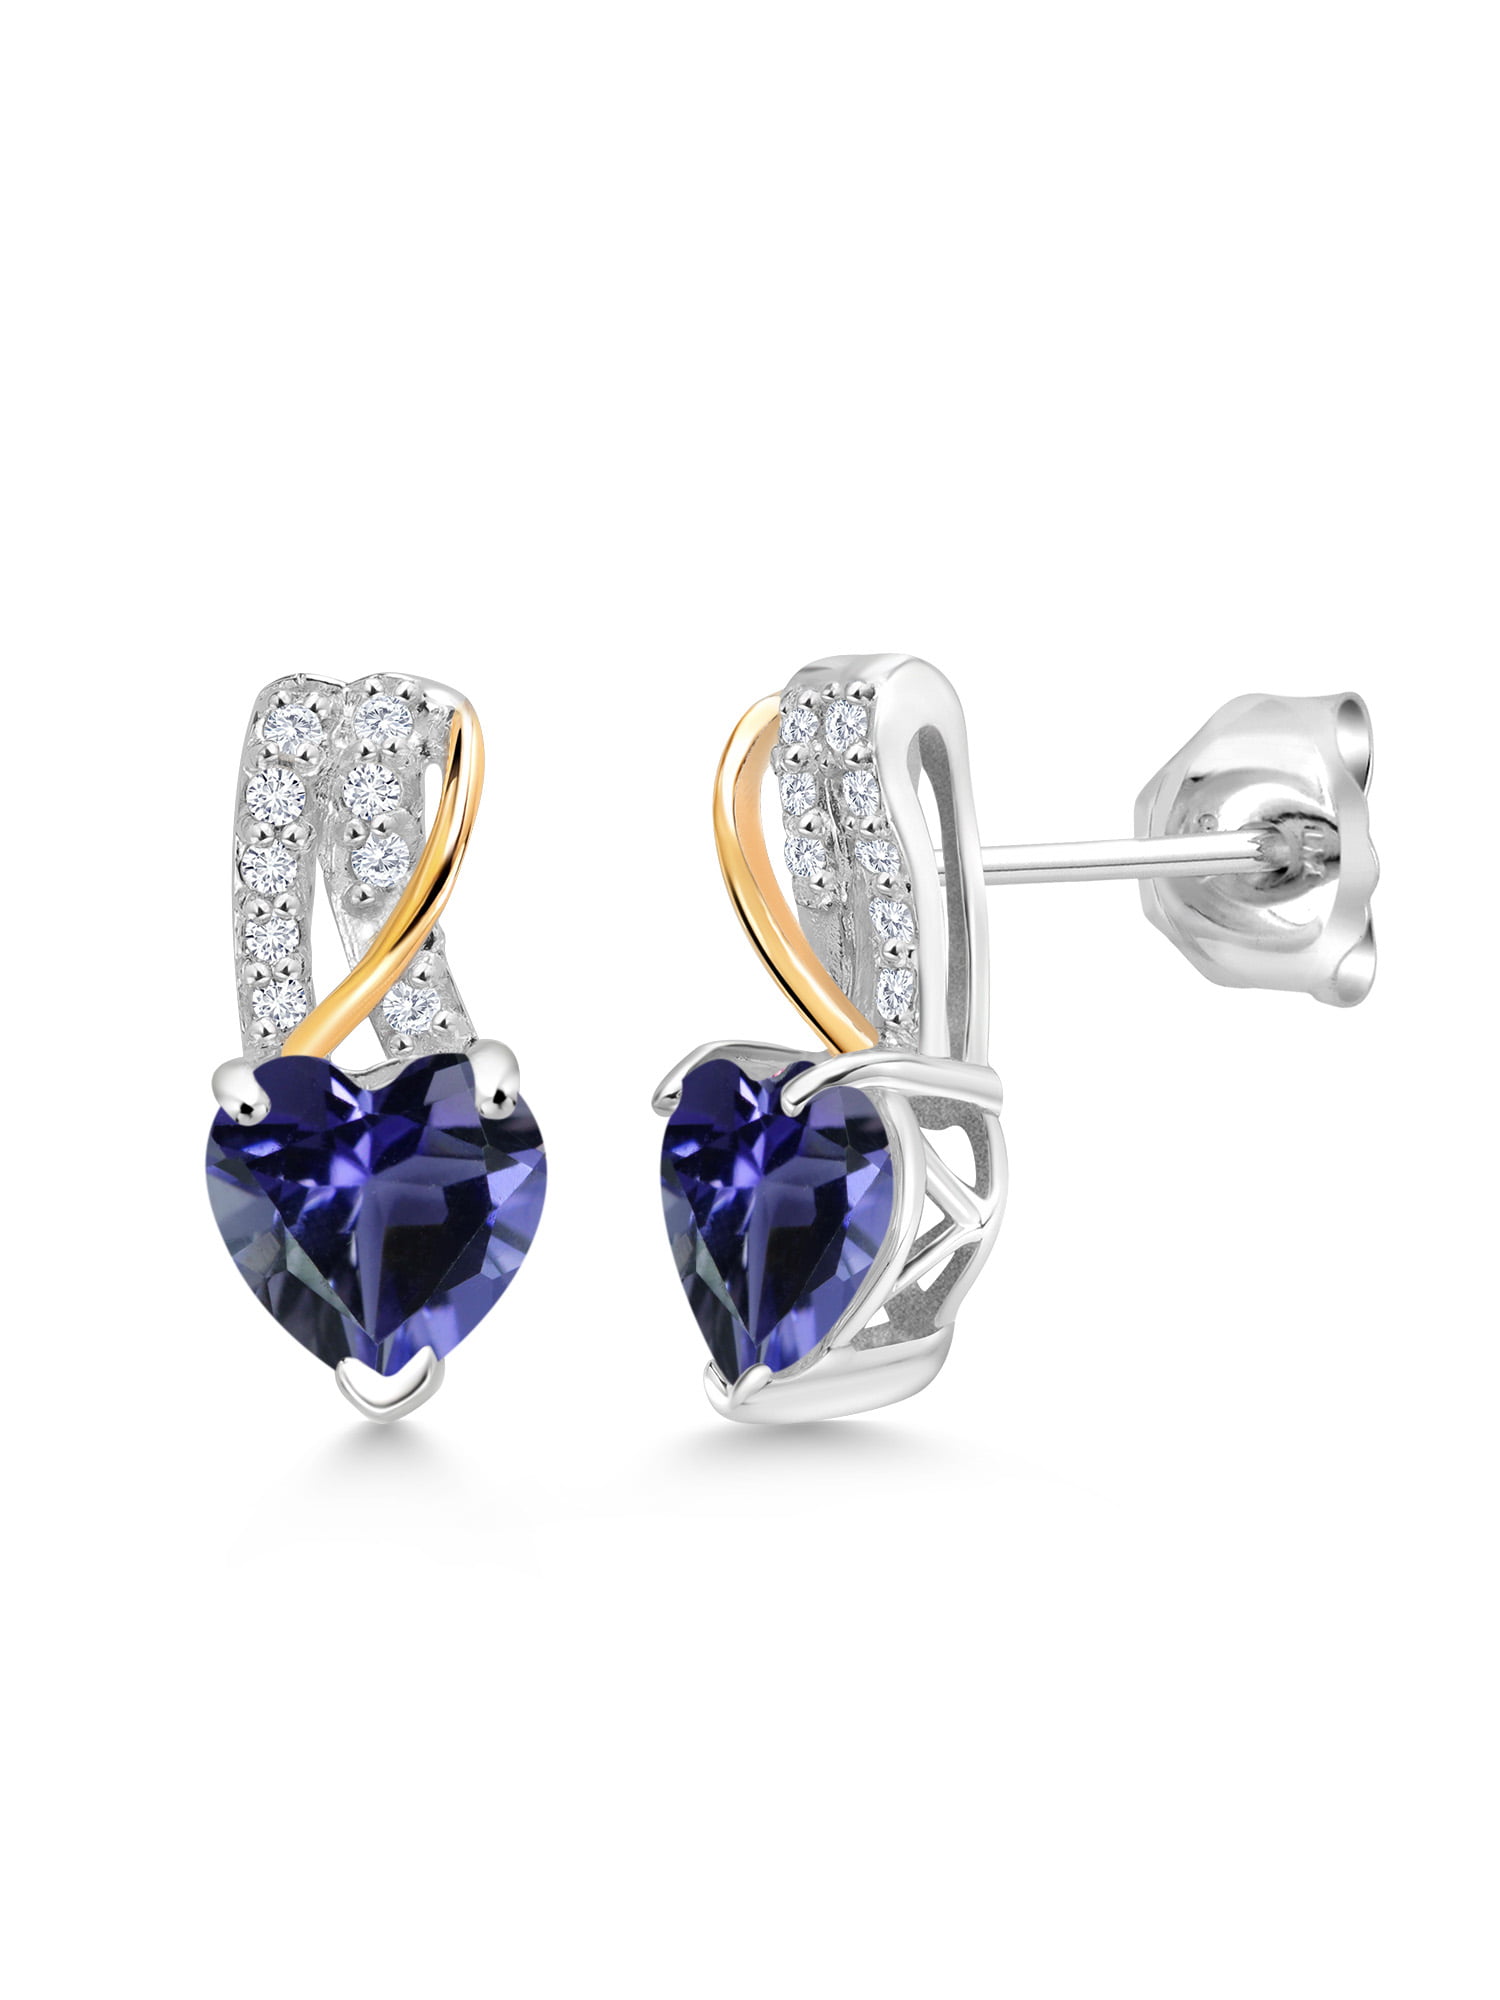 1.29 Ct Round Amethyst 925 Sterling Silver Women's Stud Earrings with Jackets 